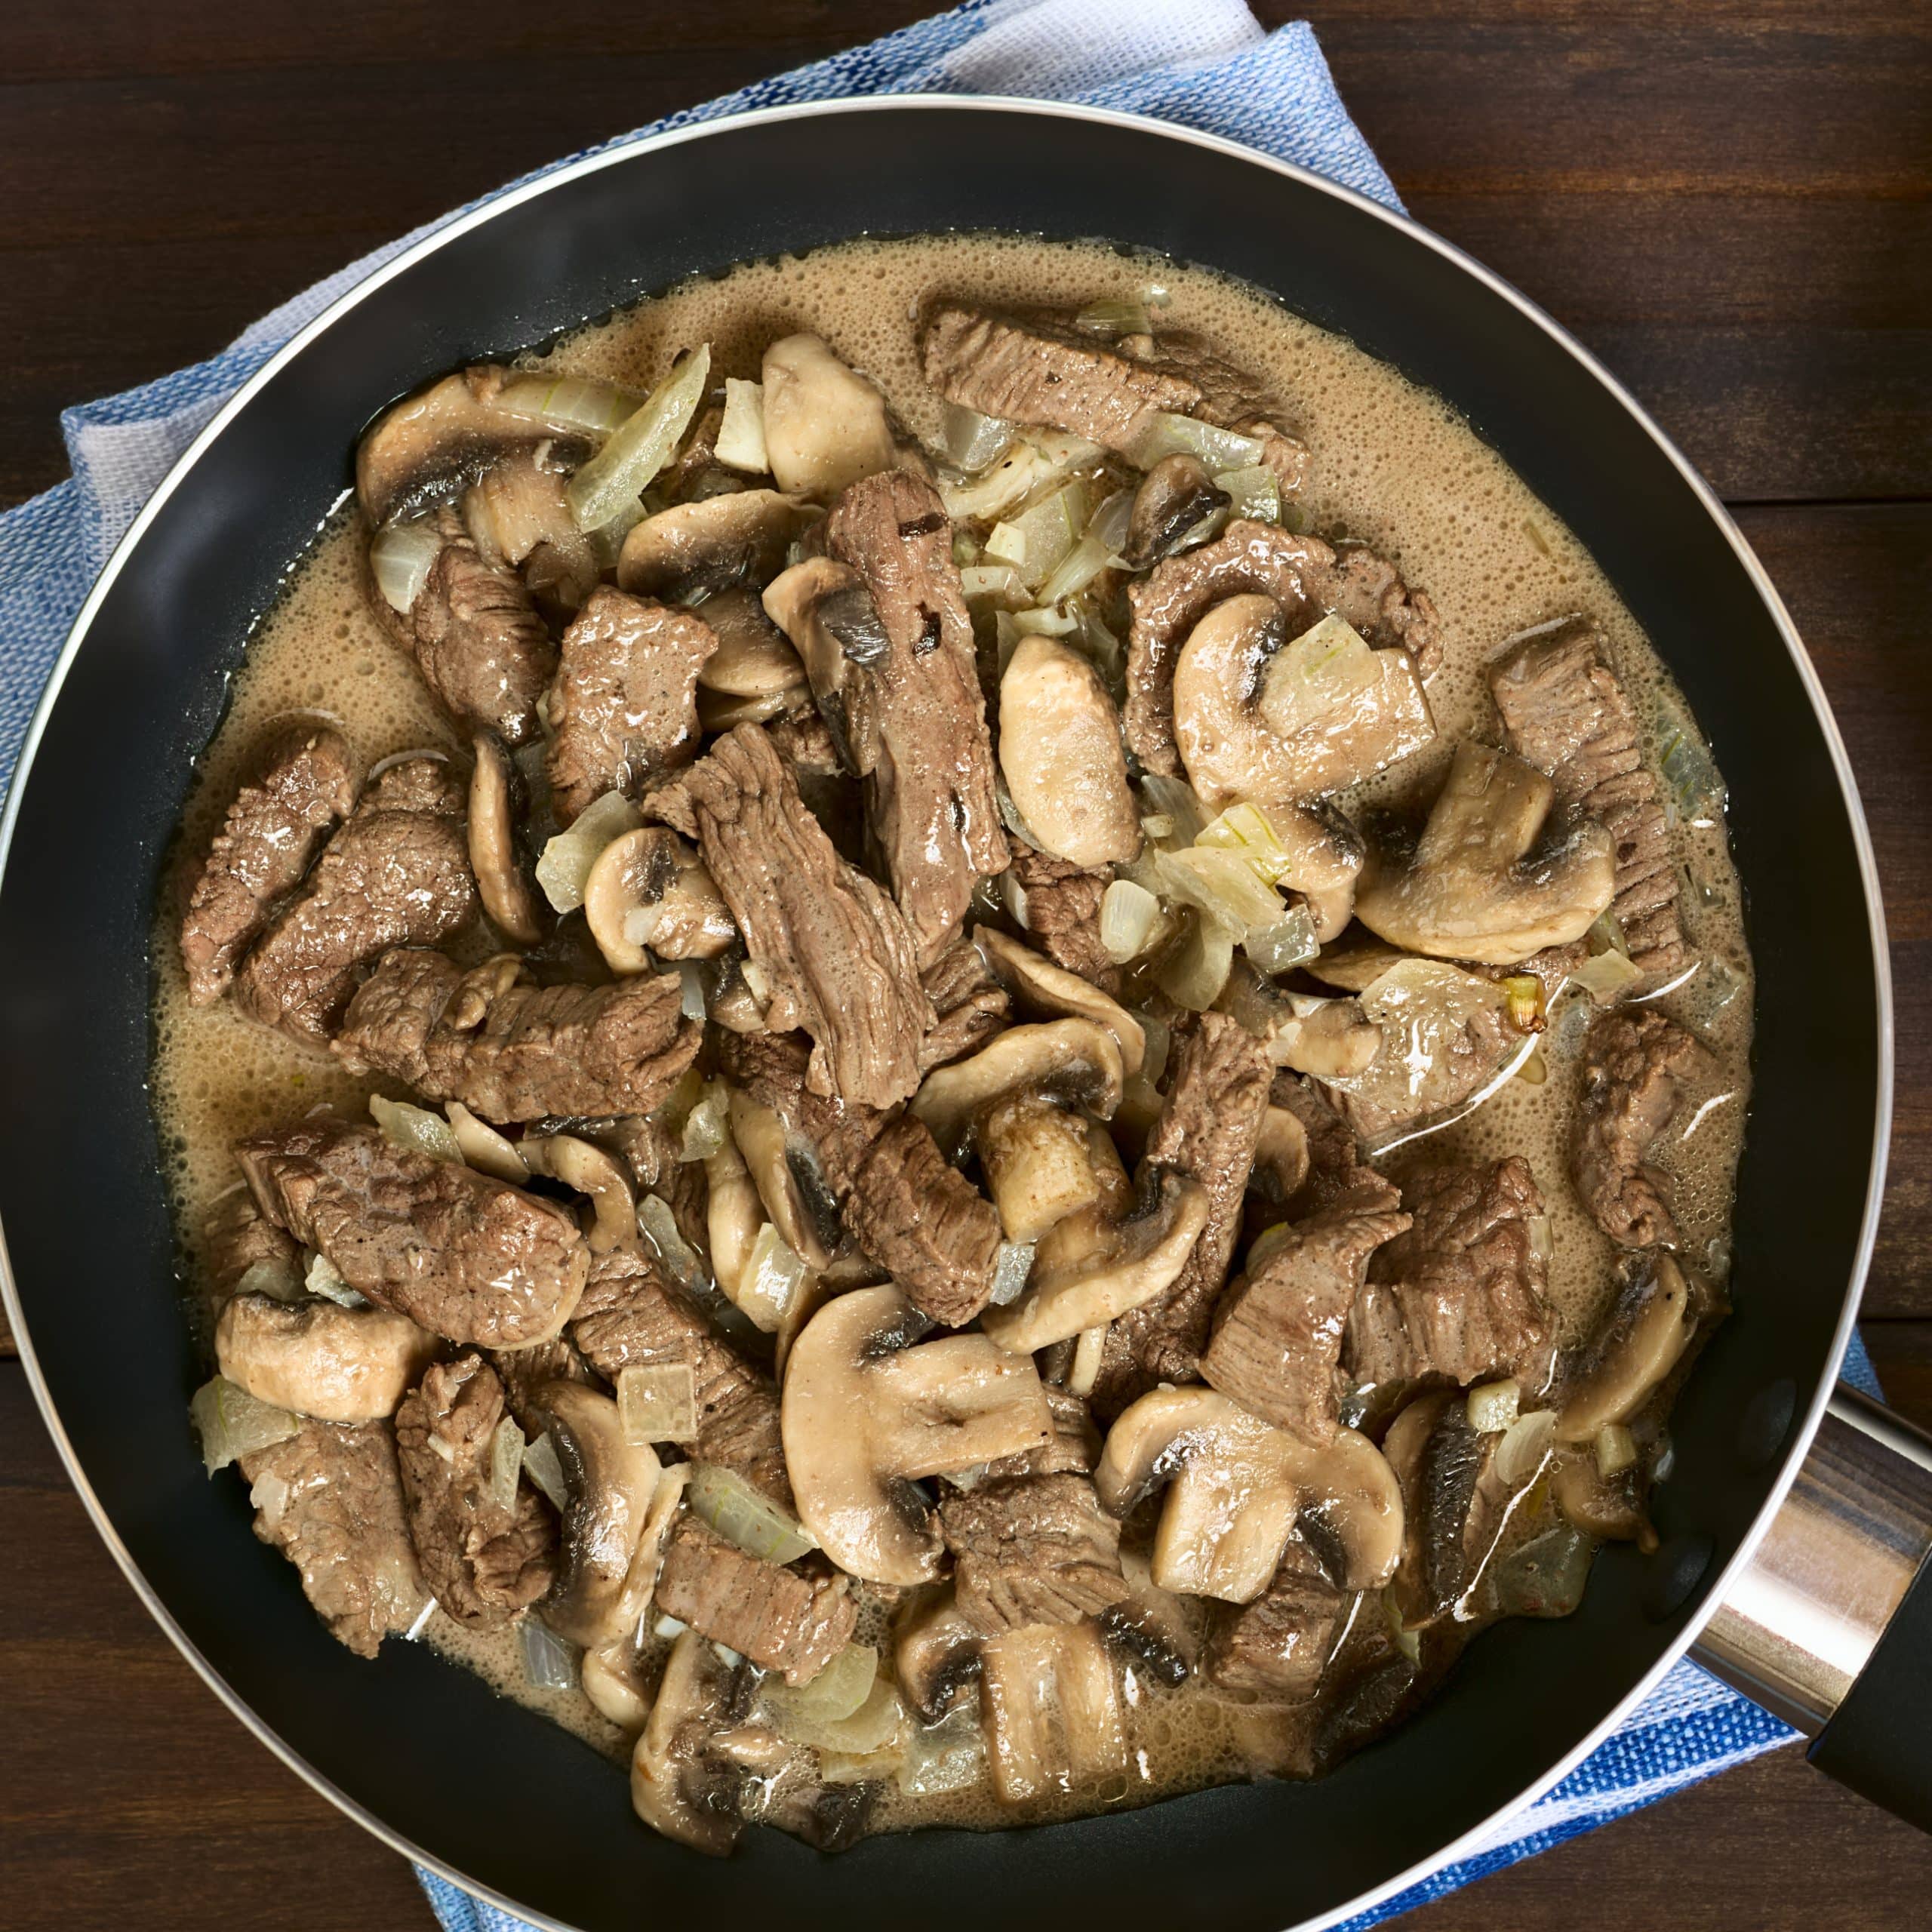 Beef Stroganoff in frying pan, a dish made of pieces of beef, mushroom and onion in cream sauce